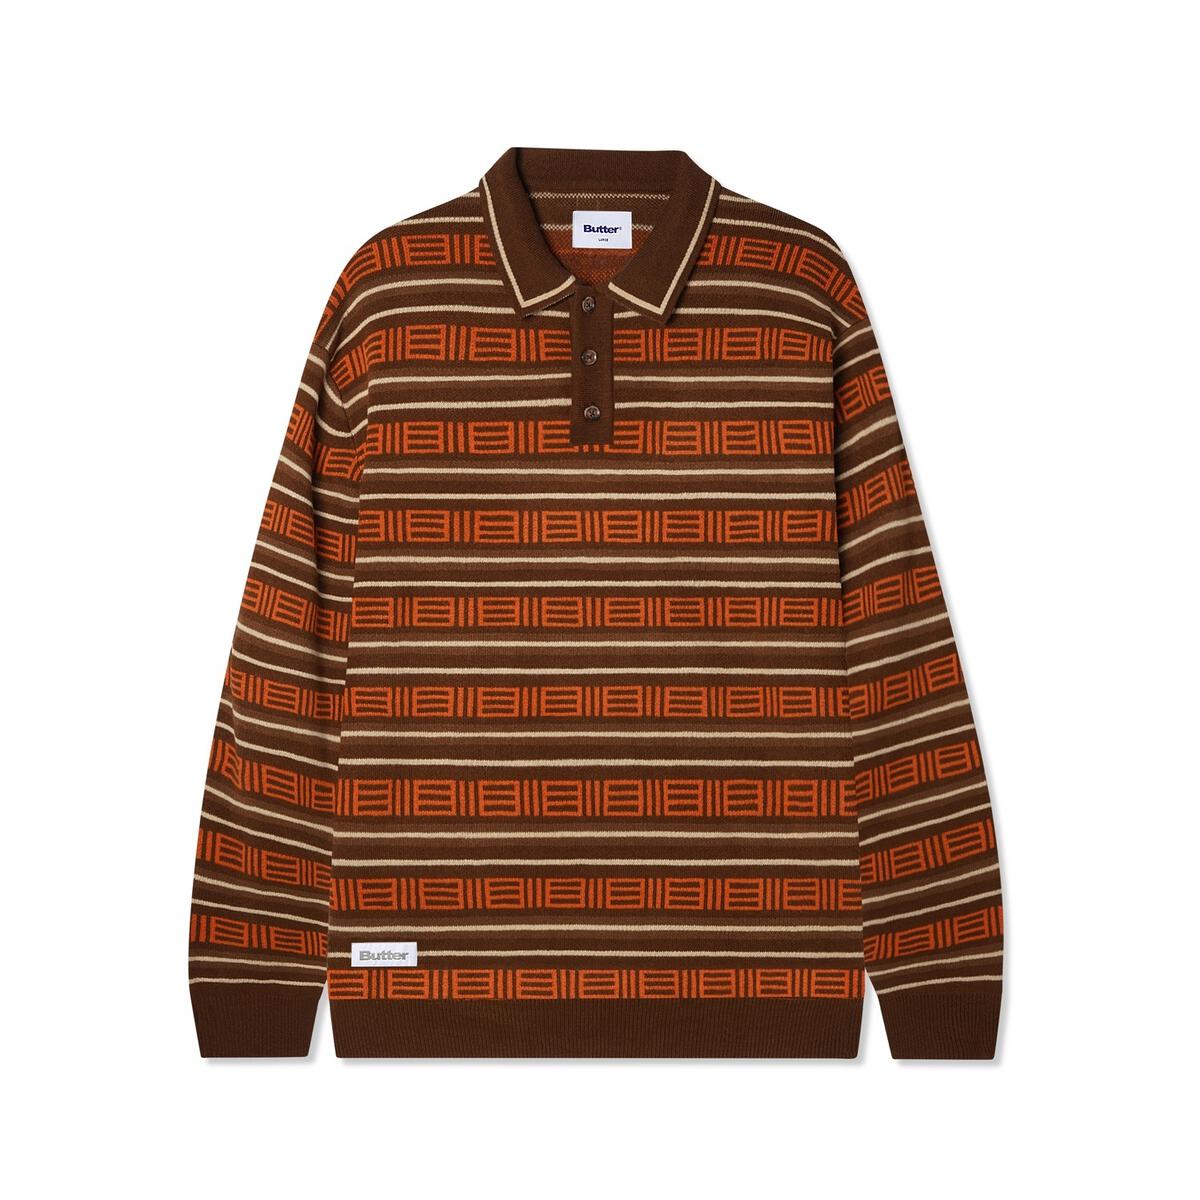 Butter Goods Windsor Knitted Sweater Brown/Tan